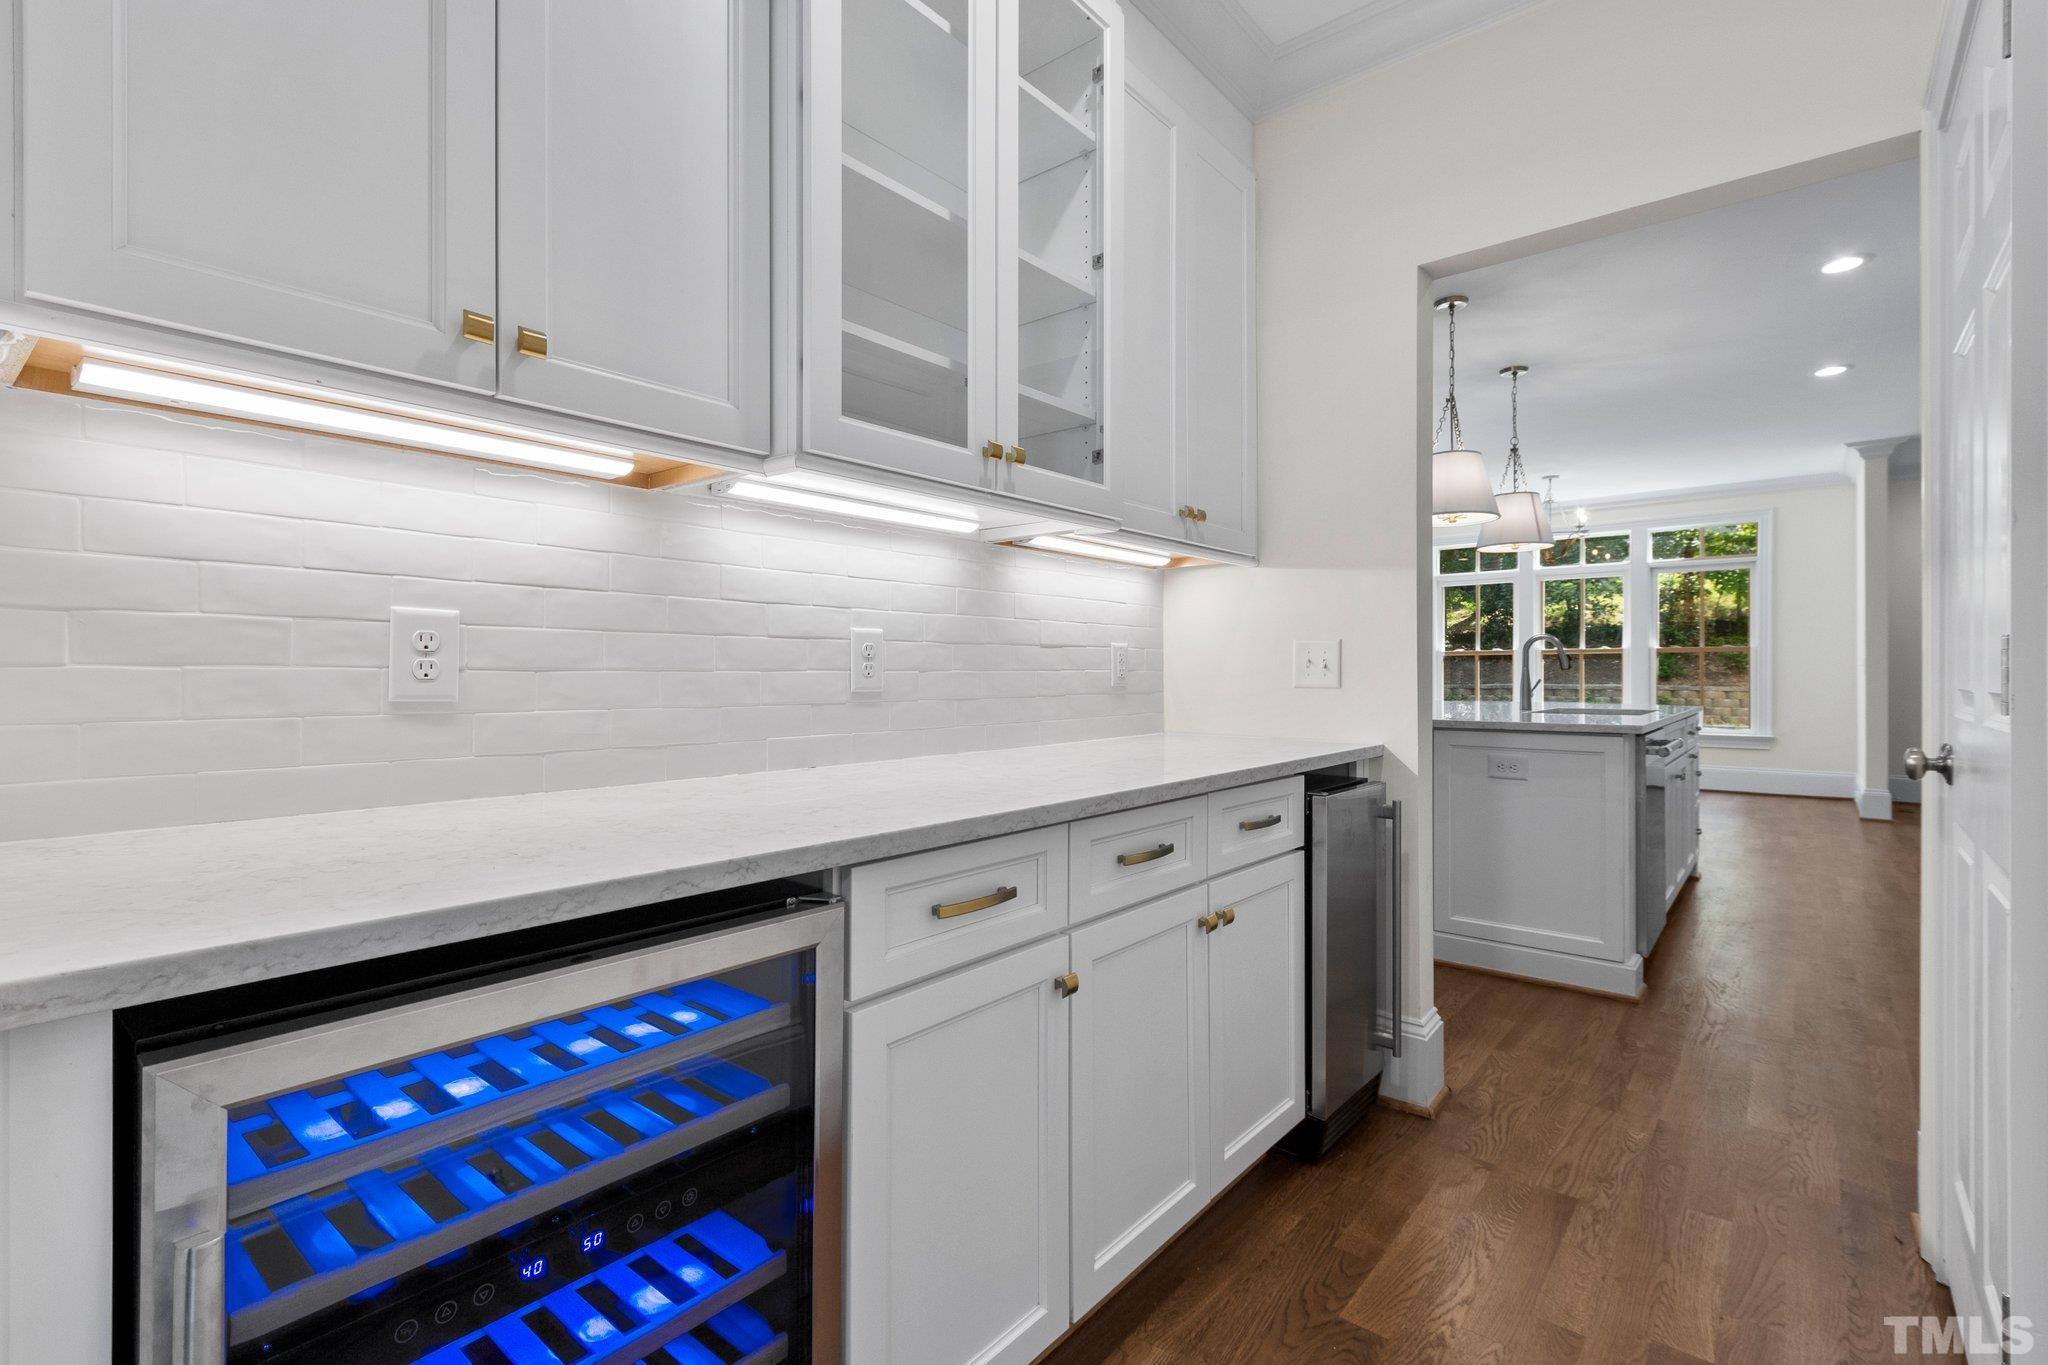 Convenient Butler's Pantry off of kitchen and leading to the dining room. Featuring quartzite countertops, tiled, backsplash, custom cabinetry, beverage cooler, ice maker and access to storage pantry.